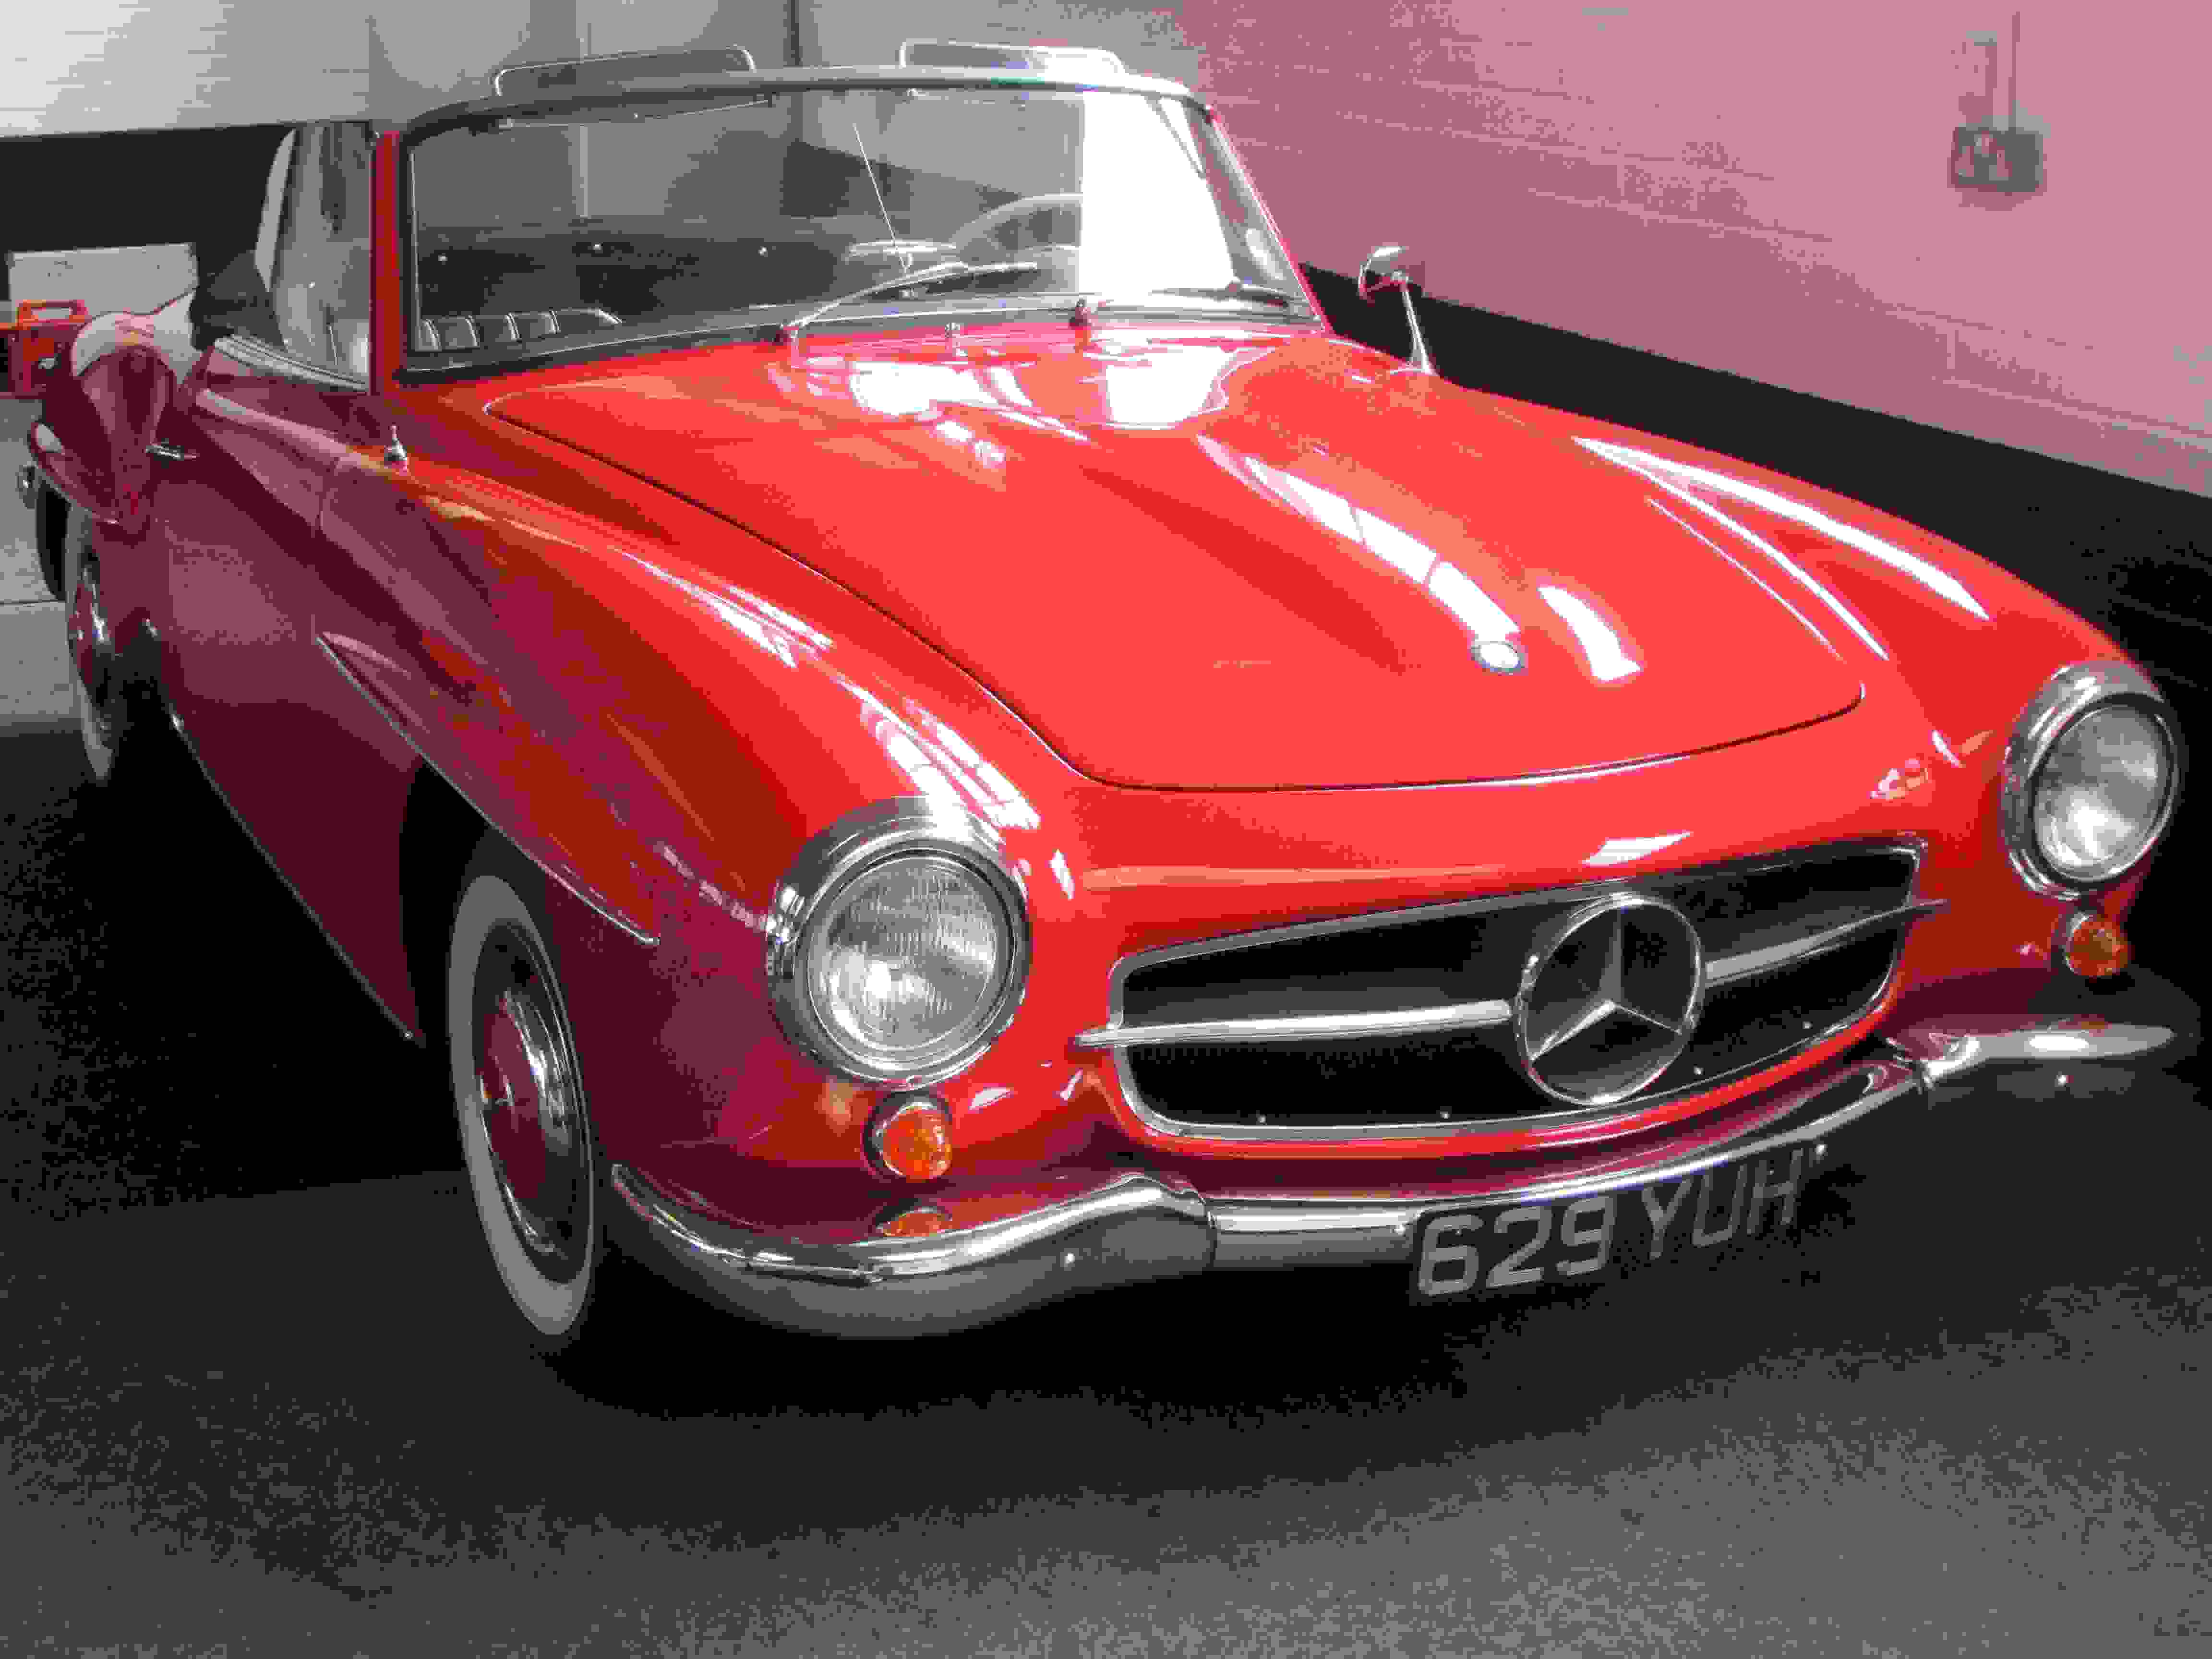 Mercedes 190SL Buying Guide: The ultimate ‘50s luxury cruiser